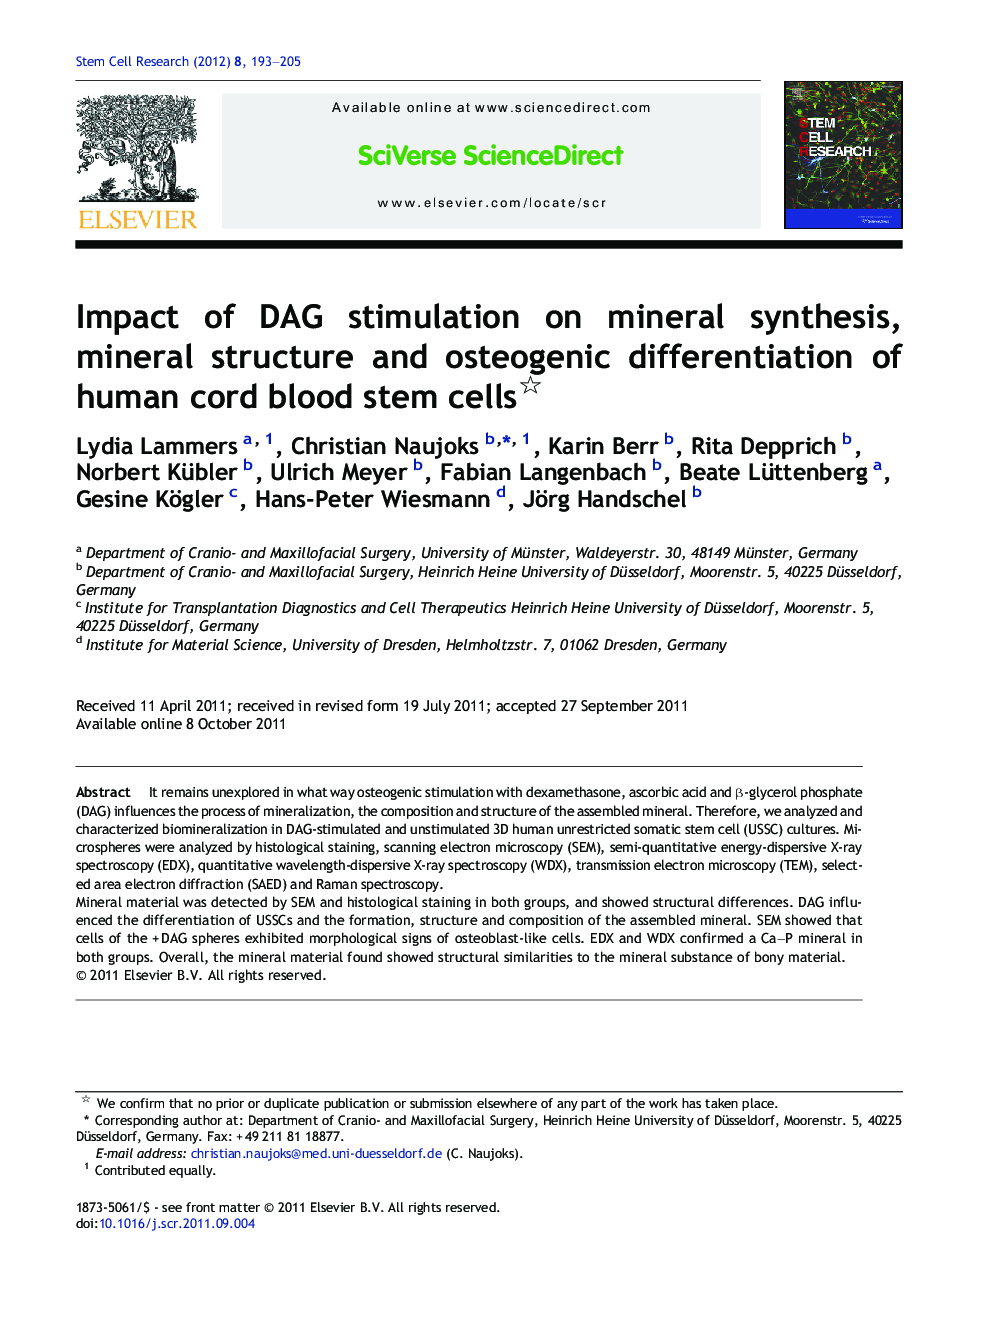 Impact of DAG stimulation on mineral synthesis, mineral structure and osteogenic differentiation of human cord blood stem cells